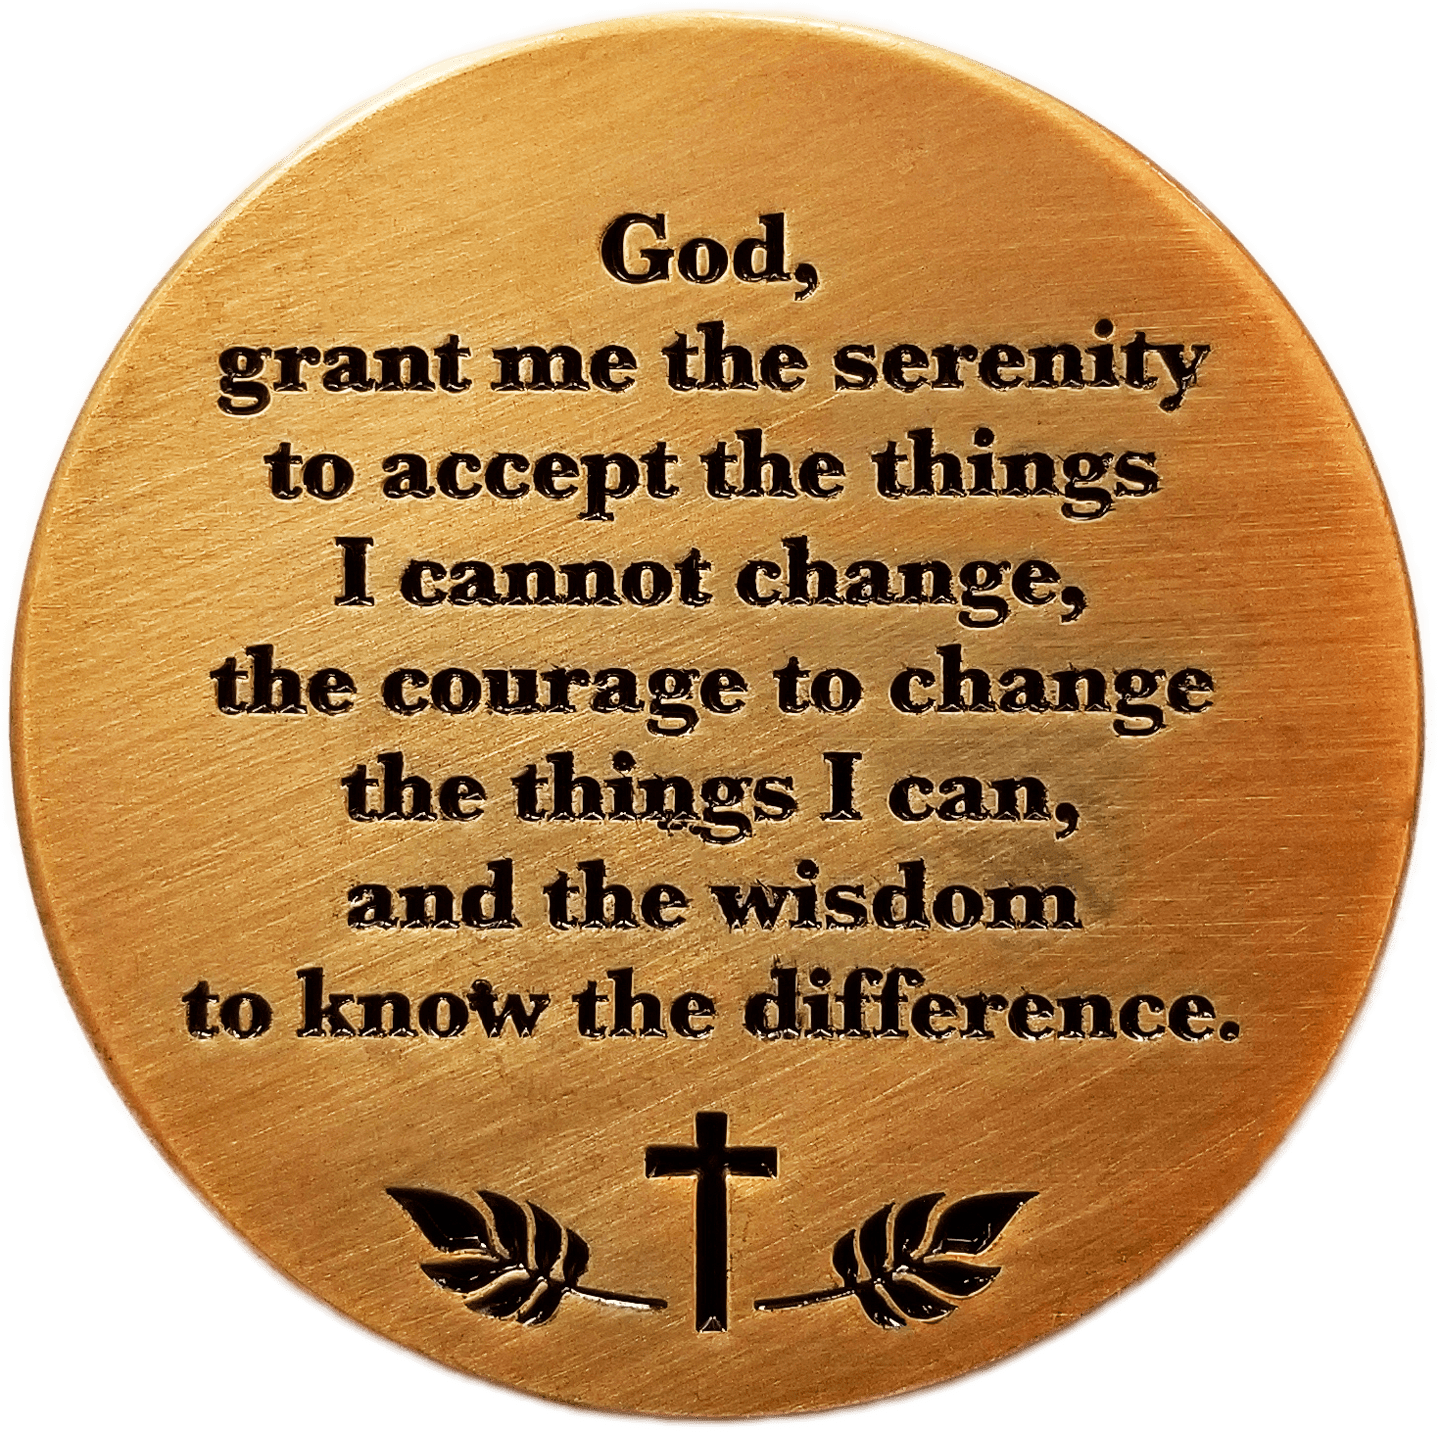 Serenity Prayer Antique Gold Plated Christian Challenge Coin - Philippians 4:6